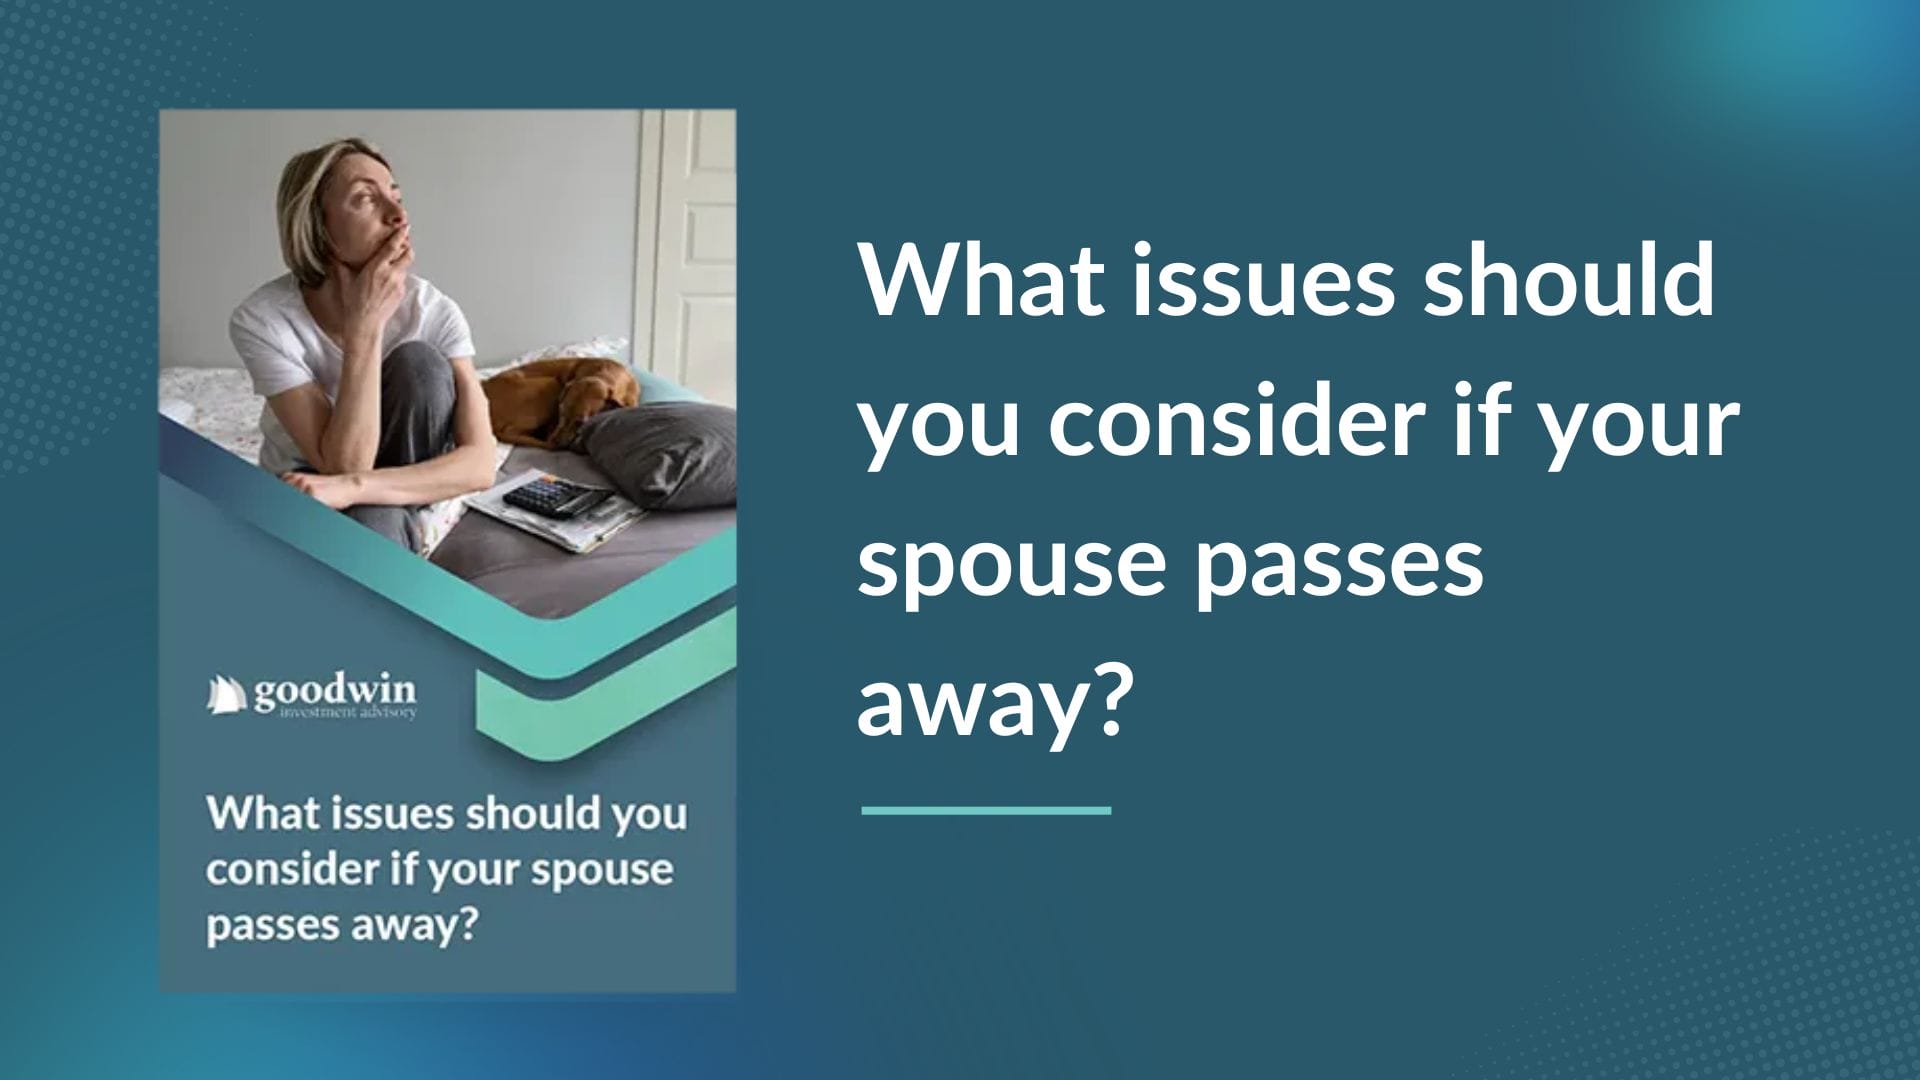 What issues should you consider if your spouse passes away